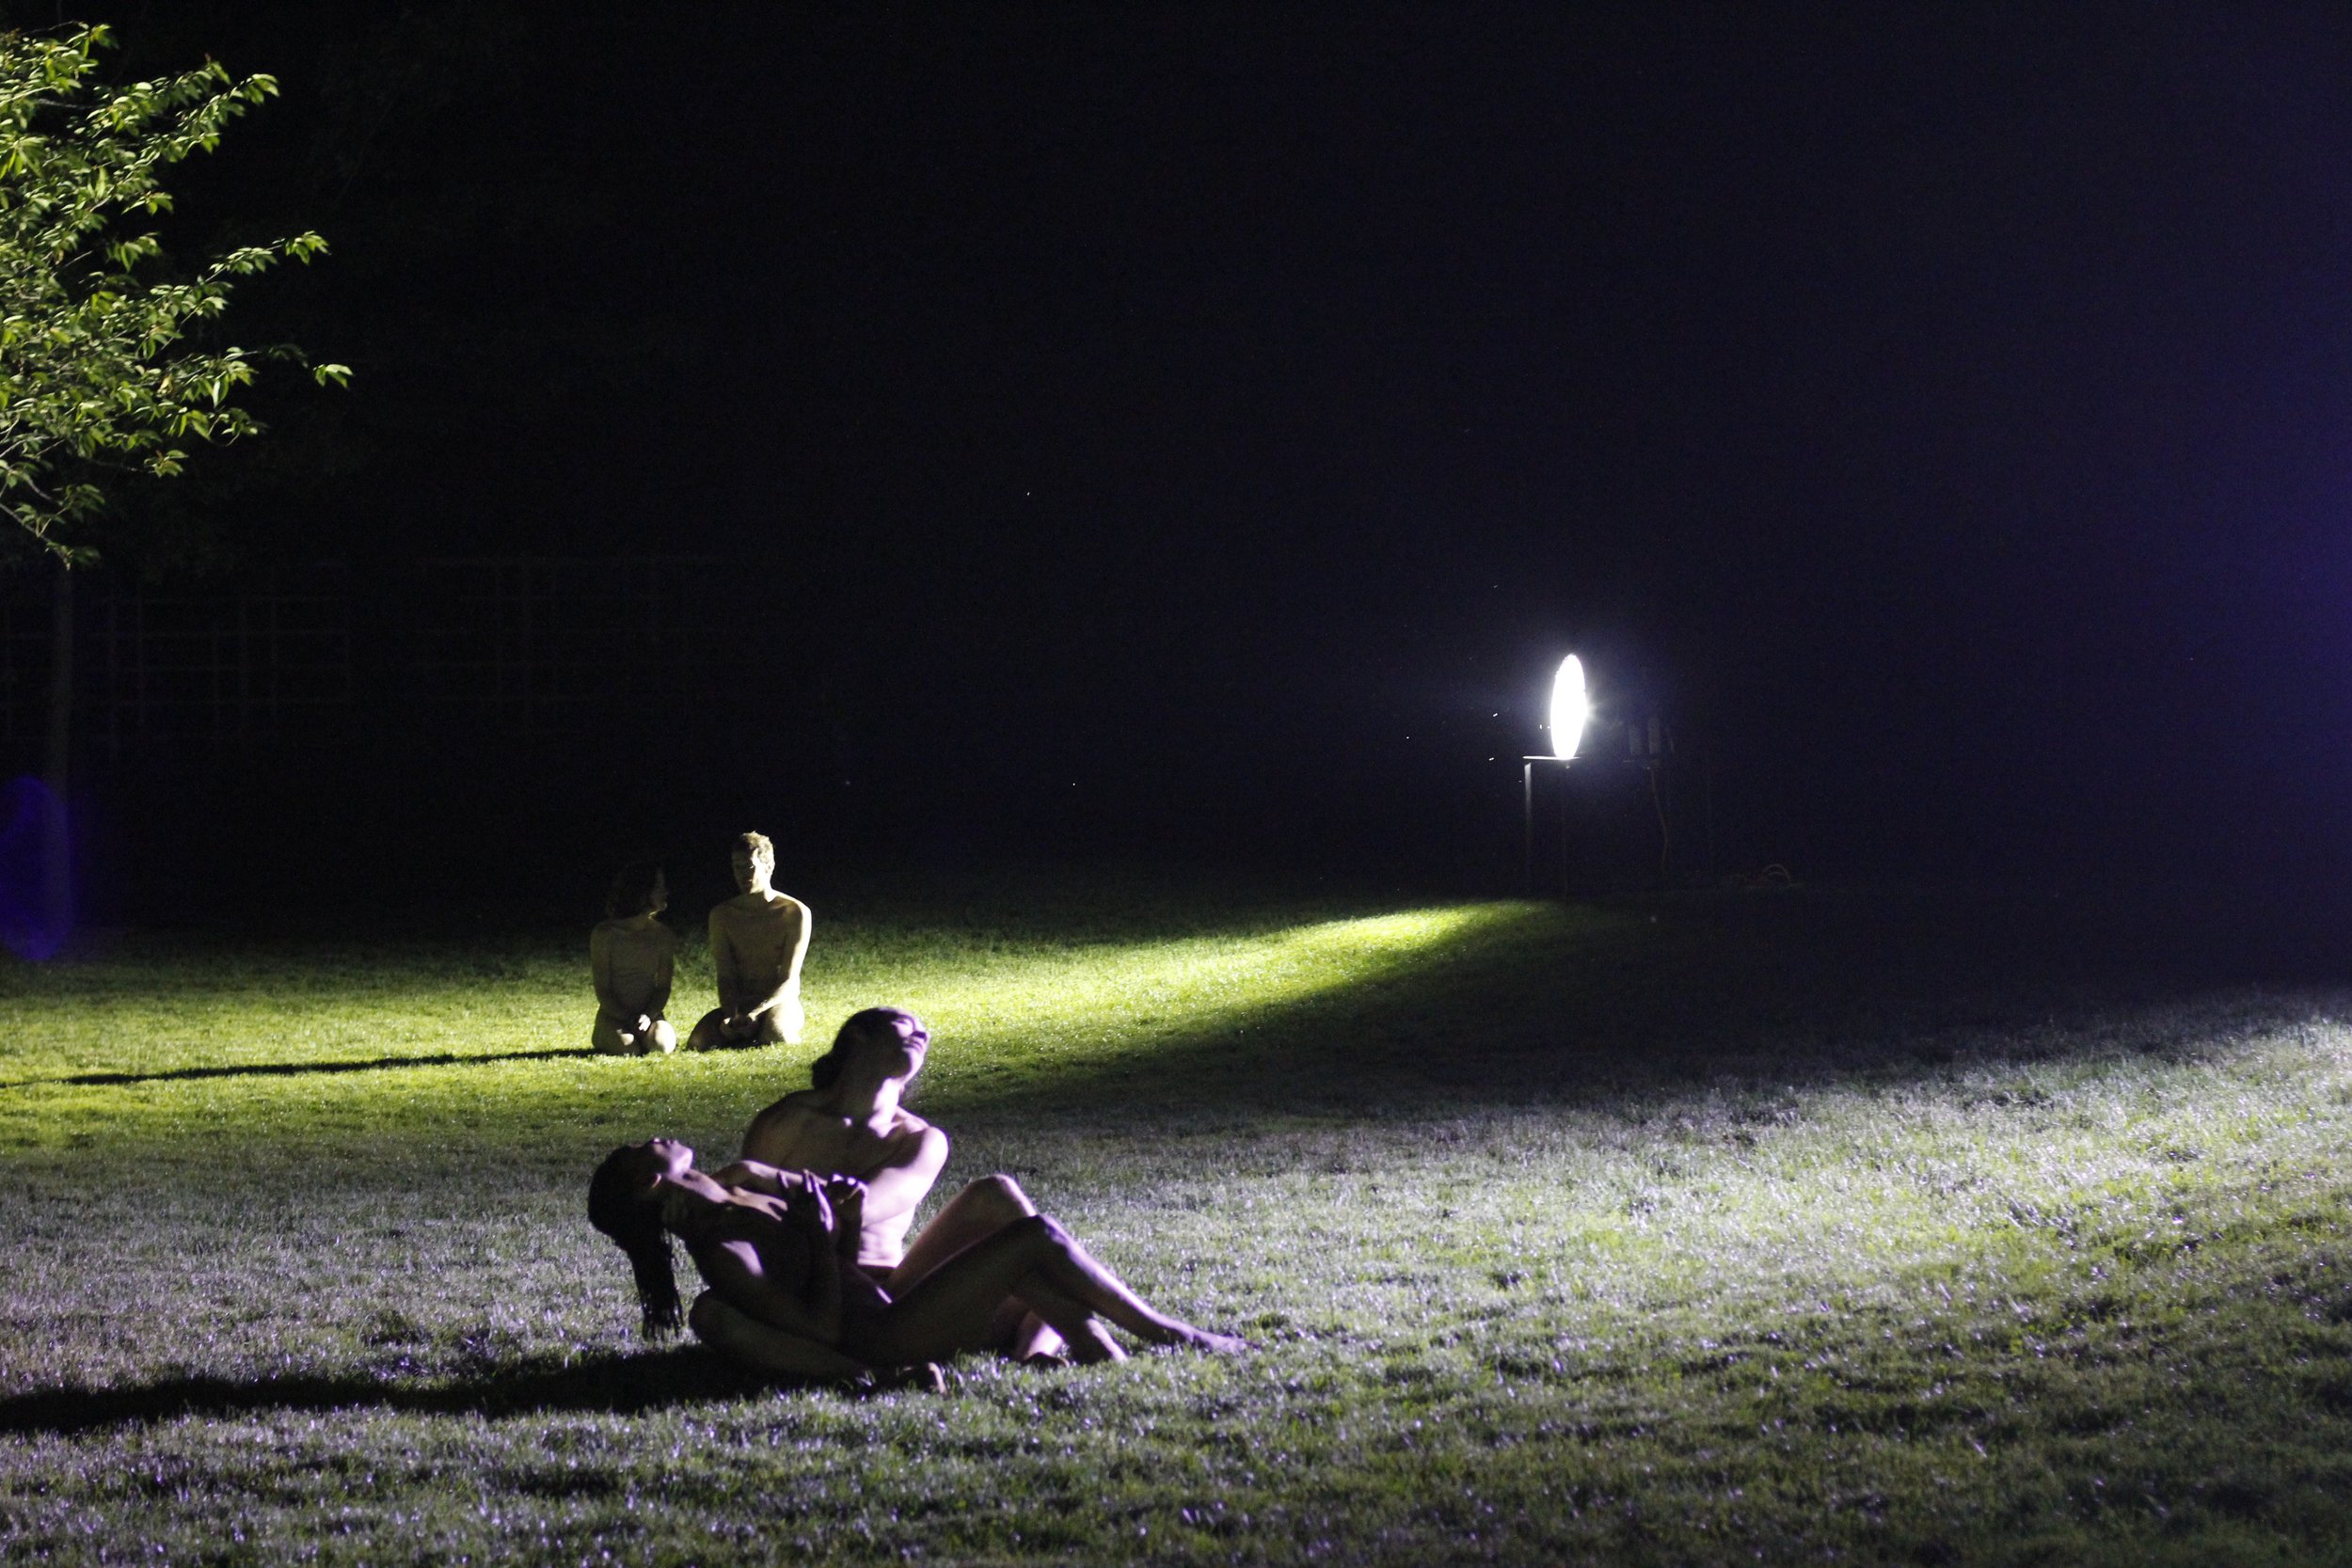 Two groups of two performers sitting together in streams of light on green grass. Some leafy branches of a tree overhead. Photo by Kevin Kwan.